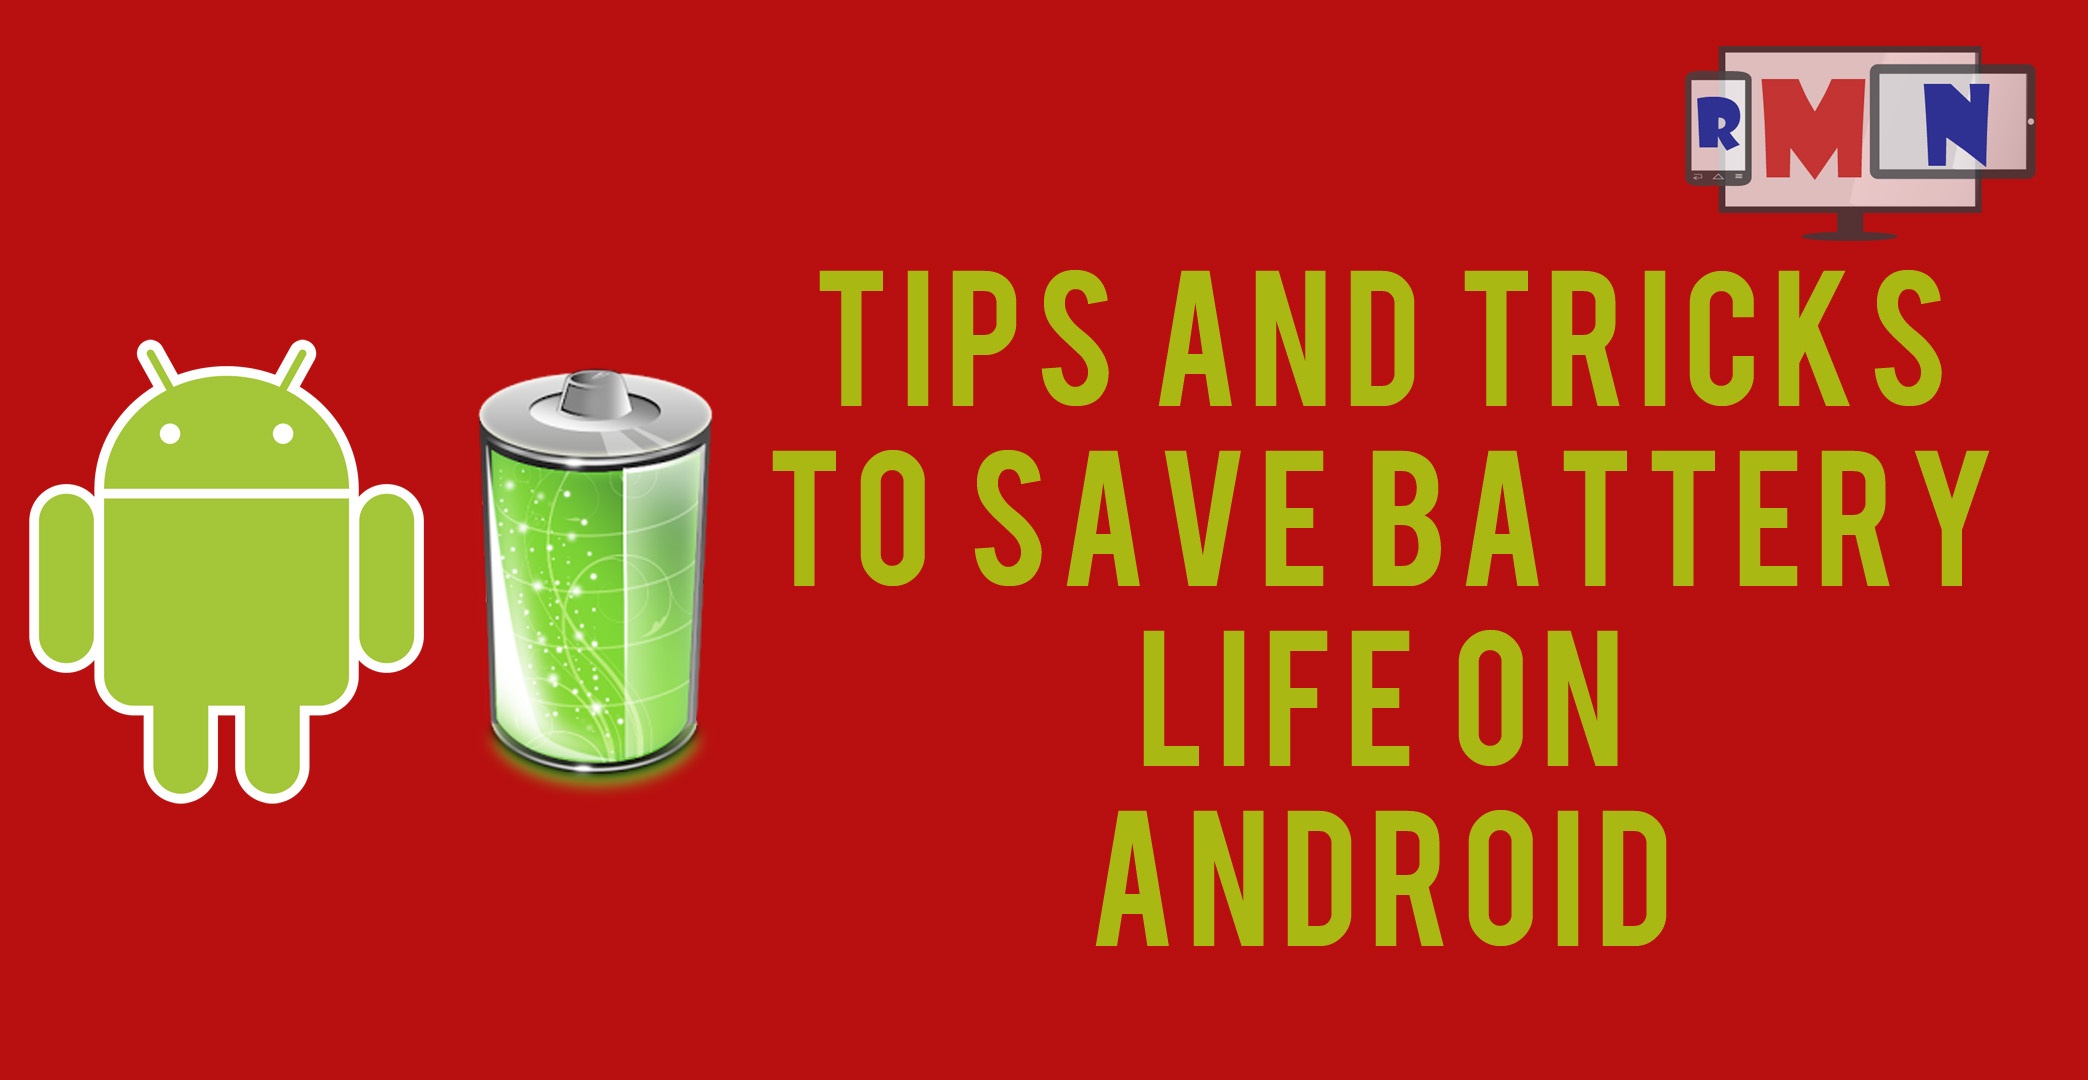 Tips And Tricks To Save Battery Life On Android